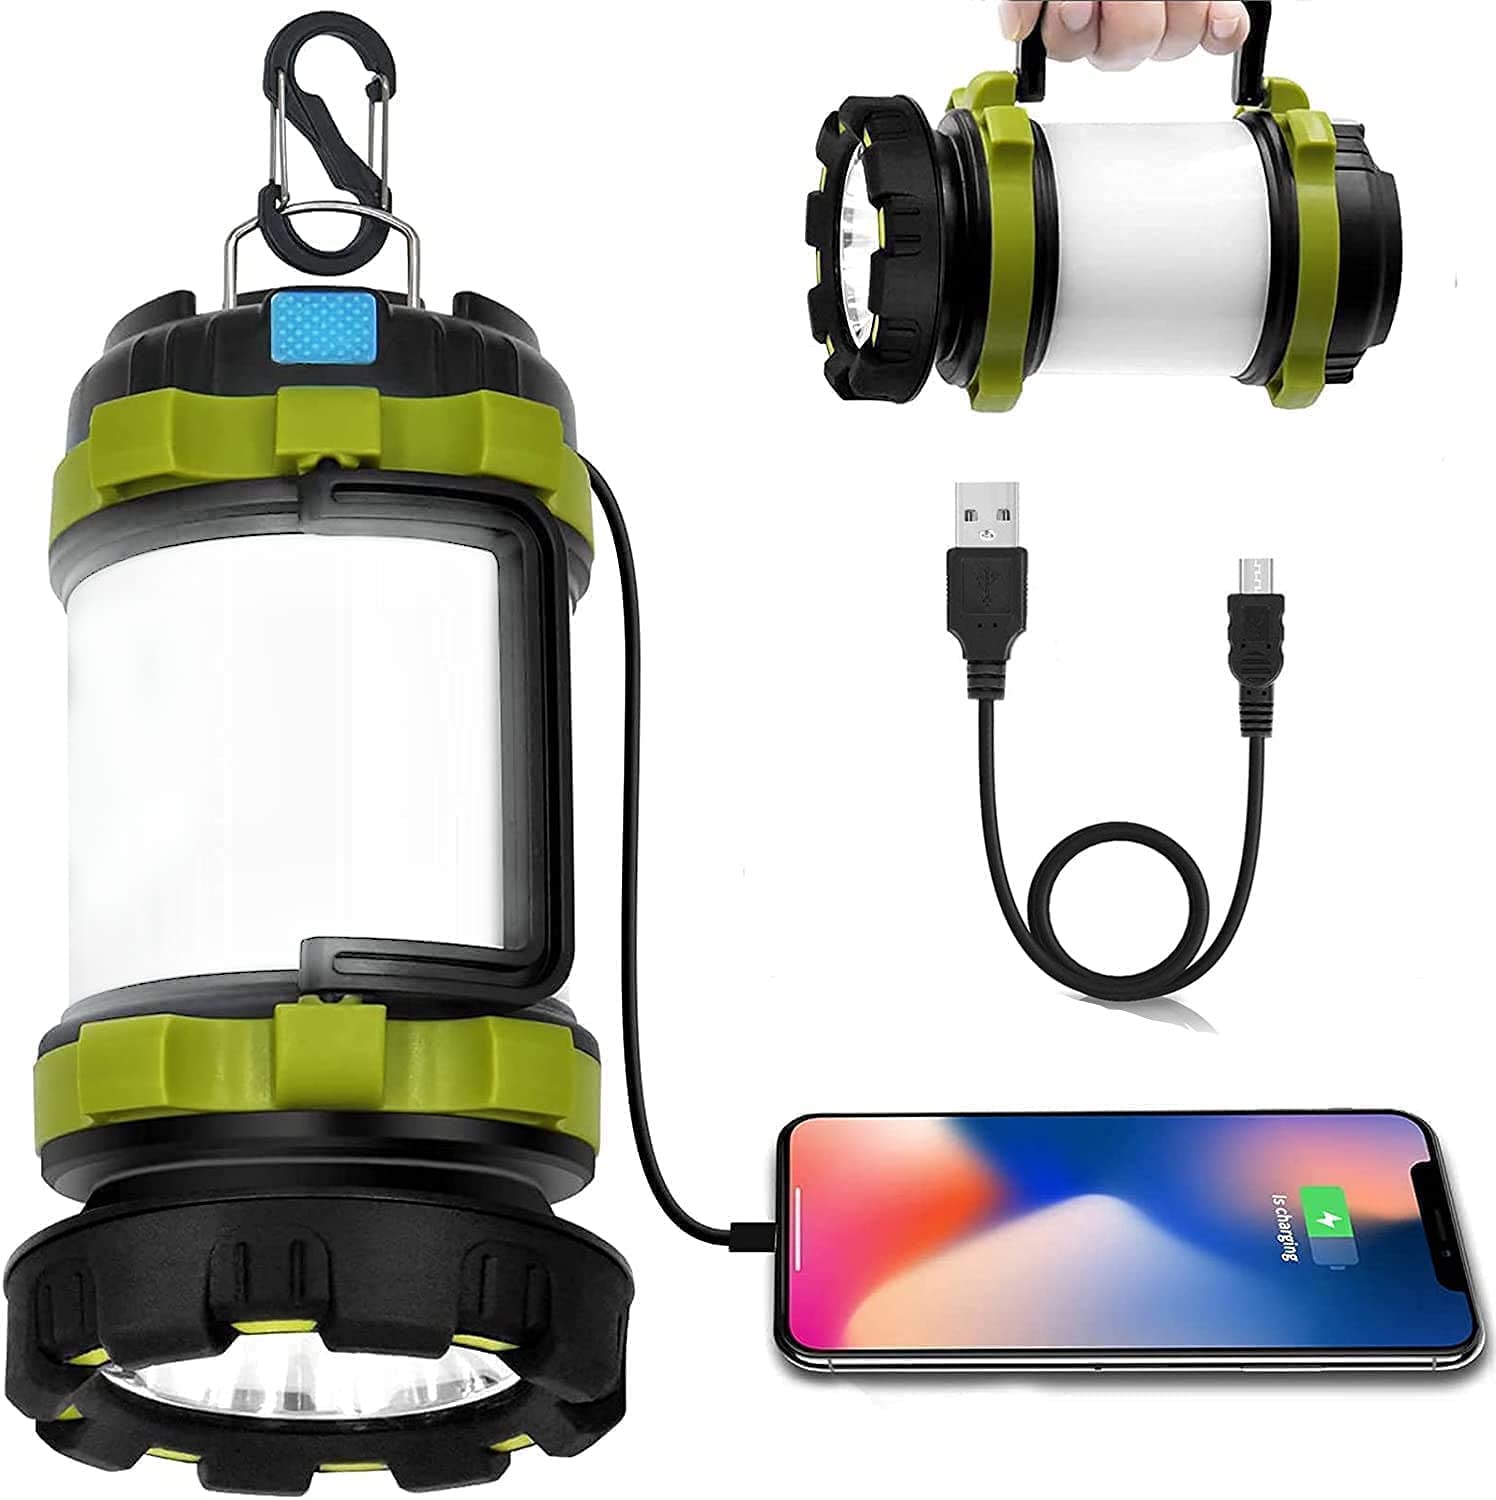 Wsky Portable Water Resistant Camping Lantern